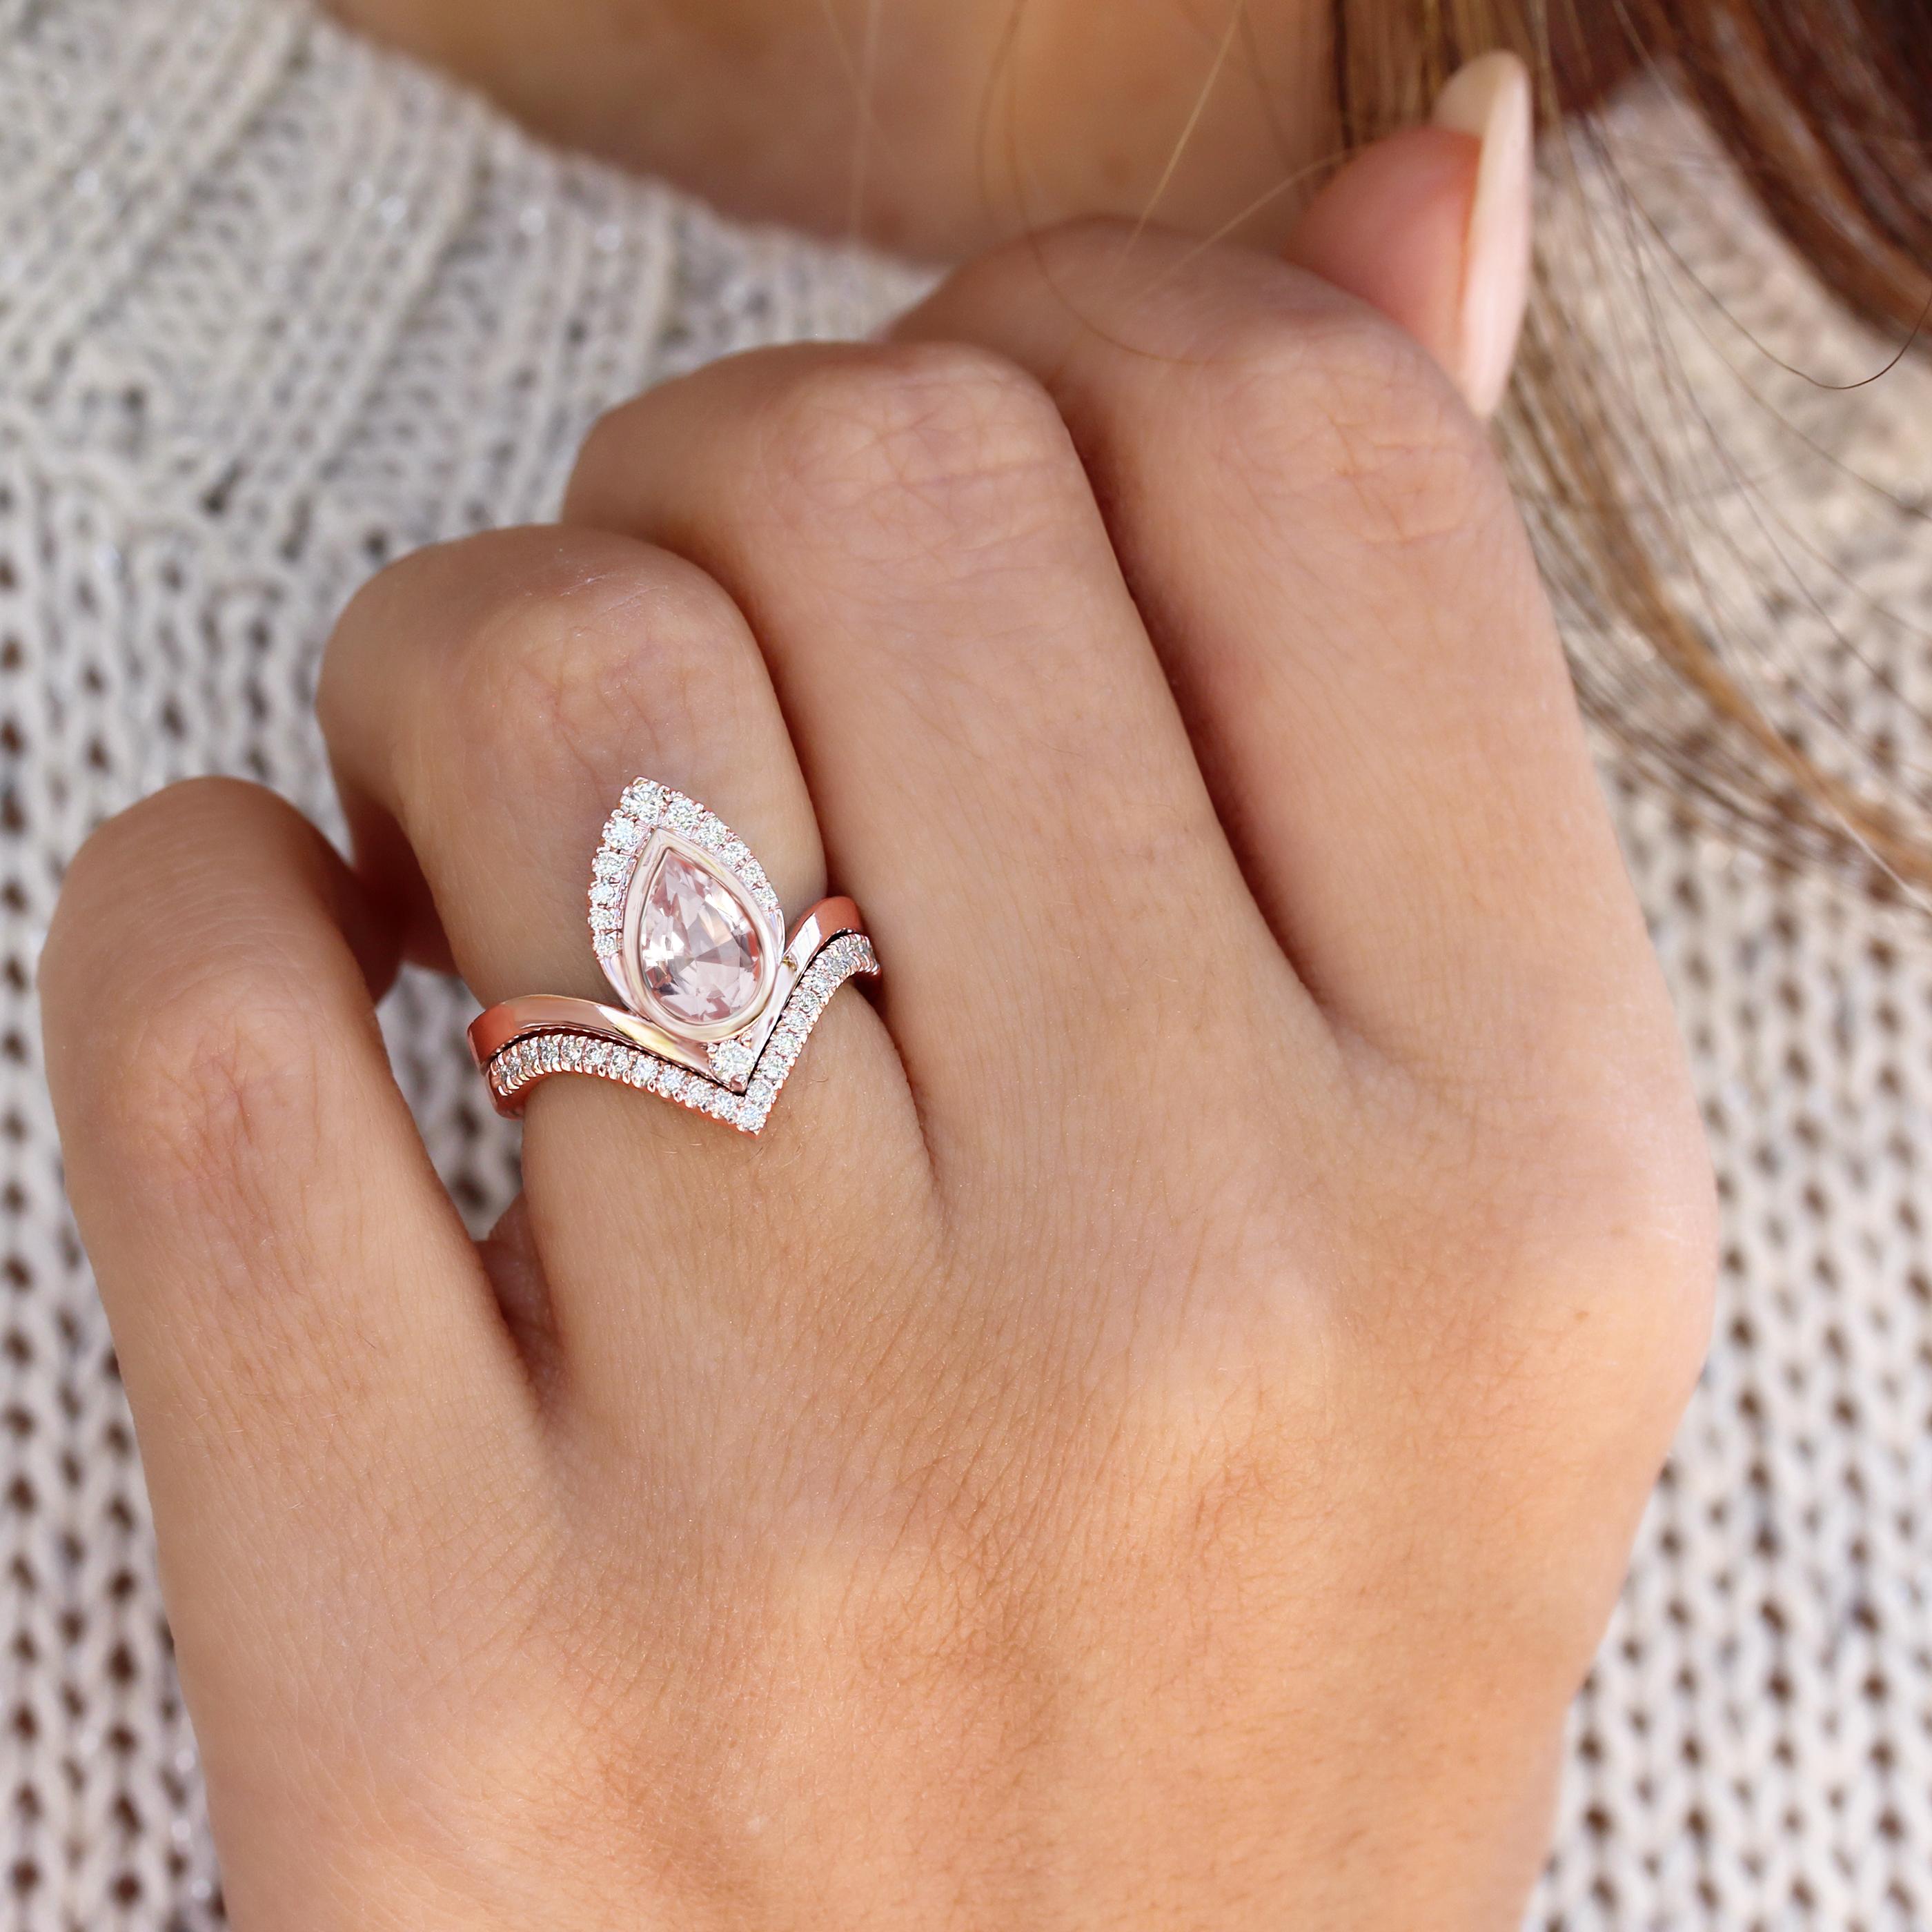 Beautiful pear-shaped Morganite and diamond engagement ring set.
Beautiful and outstanding design, royal look.
The list is for two ring set. 
Hand made with care. 
An original design by Silly Shiny Diamonds. 

Details: 
* Center Stone Shape: Pear